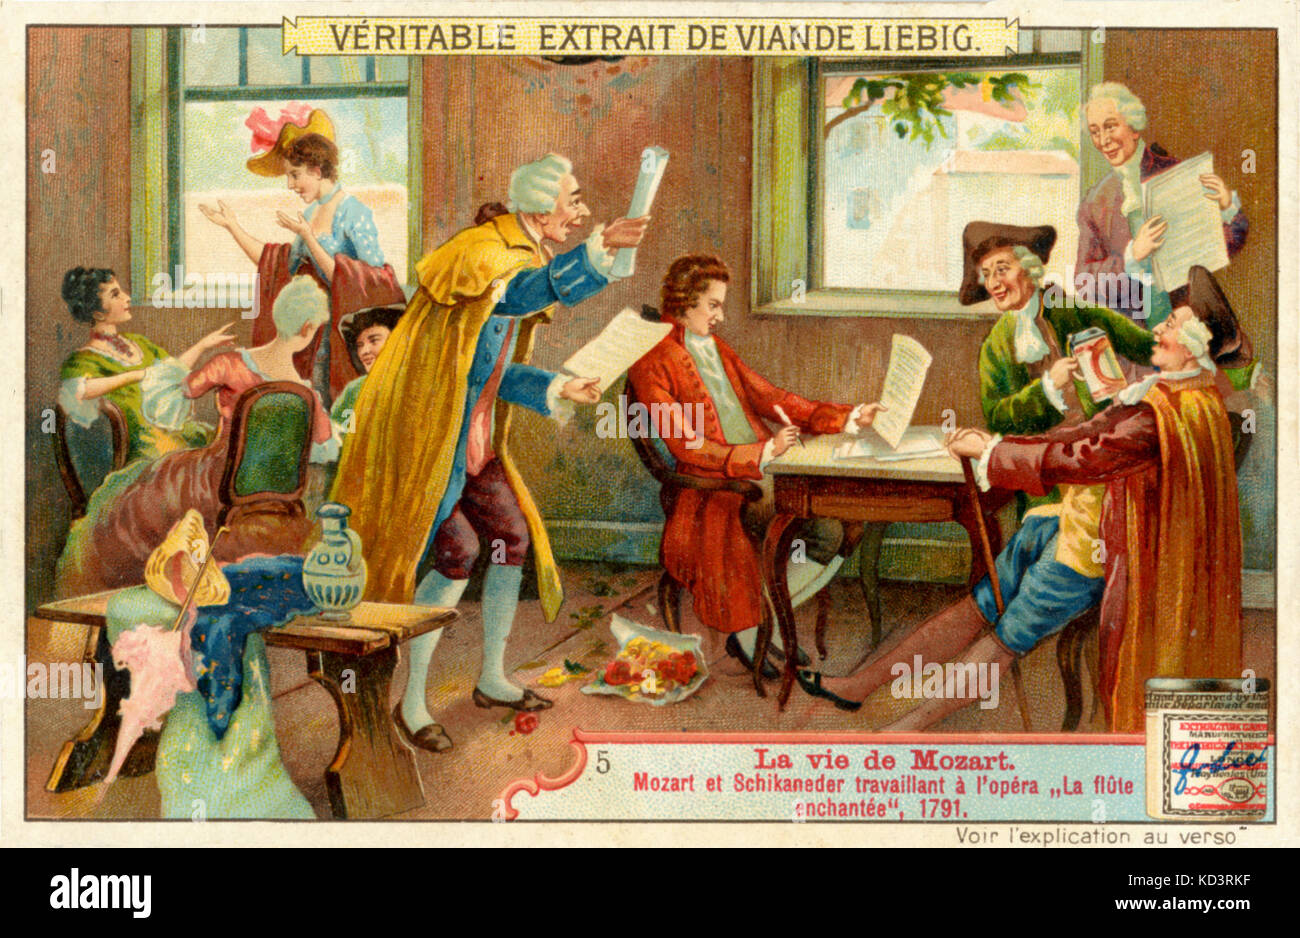 Wolfgang Amadeus Mozart's Magic Flute, 1791. Schikaneder and Mozart, Austrian composer, at work on the opera. From 'Viande Liebig'  Advert.  1756-1791 Stock Photo